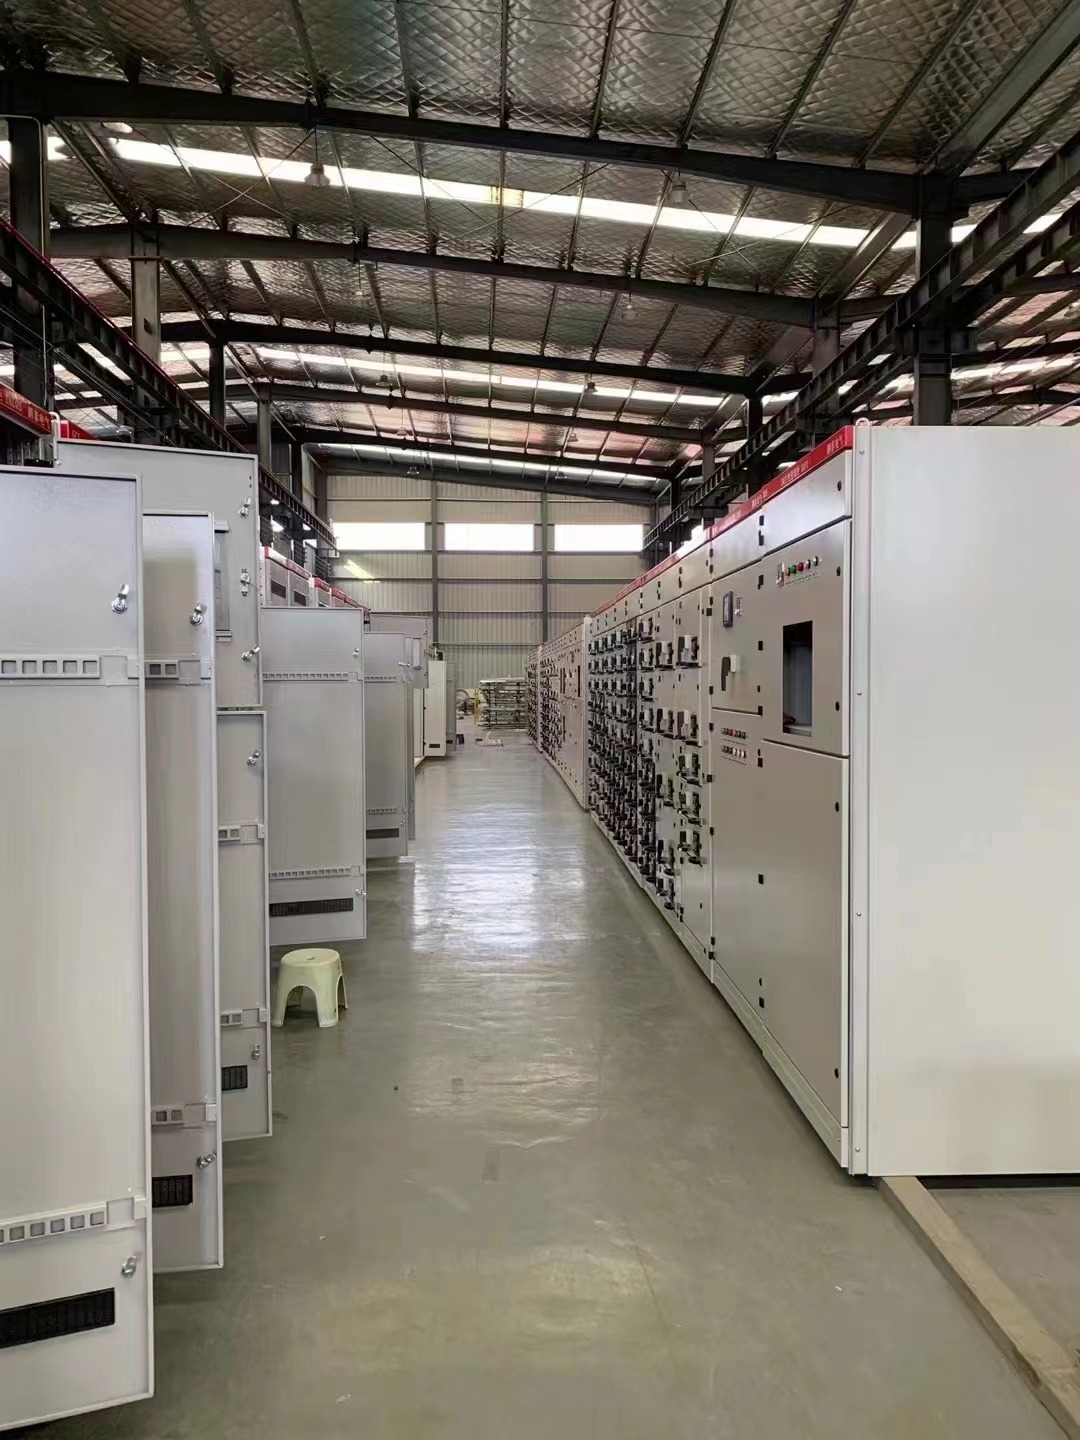 Pabrika ng electrical switchgear sa China，presyo-SPL- power transformer,electrical transformer,Combined compact substation,Metalclad AC Enclosed Switchgear,Low Voltage Switchgear, Indoor AC Metal Clad Intermediate Switchgear,Non-encapsulated Dry-type Power Transformer,Unwrapped coil dry-type na transformer ,Epoxy resin cast silicon steel sheet dry-type na transpormer,Epoxy resin cast amorphous alloy dry-type na transpormer,Amorphous alloy na oil-immersed power transformer,Silicon steel sheet oil-immersed power,electric transformer,Distribution Transformer,boltahe transpormer,step-down transformer,reducing transformer,low-loss power transformer, loss power transformer, Oil-type na Transformer, Oil Distribution Transformer, Transformer-Oil-lmmersed, Oil Transformer, Oil Immersed Transformer, three phase oil immersed power transformer, oil filled electrical transformer, Sealed amorphous alloy power transformer,Dry Type Transformer,dry Transformer,Cast Resin Dry Type Transformer,dry-type na transpormer,resin-casting type tra nsformer,resinated dry type transformer,CRDT,Unwrapped coil power transformer,three phase dry Transformer,articulated unit substation,AS,Modular substation,transformer substation,electric substation,Power Sub-station,Preinstalled substation,YBM,prefabricated substation,Distribution Substation, compact substation,MV power station,LV power station,HV power station,Switchgear Cabinet,MV Switchgear Cabinet,LV Switchgear Cabinet,HV Switchgear Cabinet,pull-out switch cabinet,Ac metal closed ring network switchgear,Indoor metal armored central switchgear,Box -type na substation, mga custom na transformer, mga customized na mga transformer, Metal enclosed electrical switchgear, LV Switchgear Cabinet,